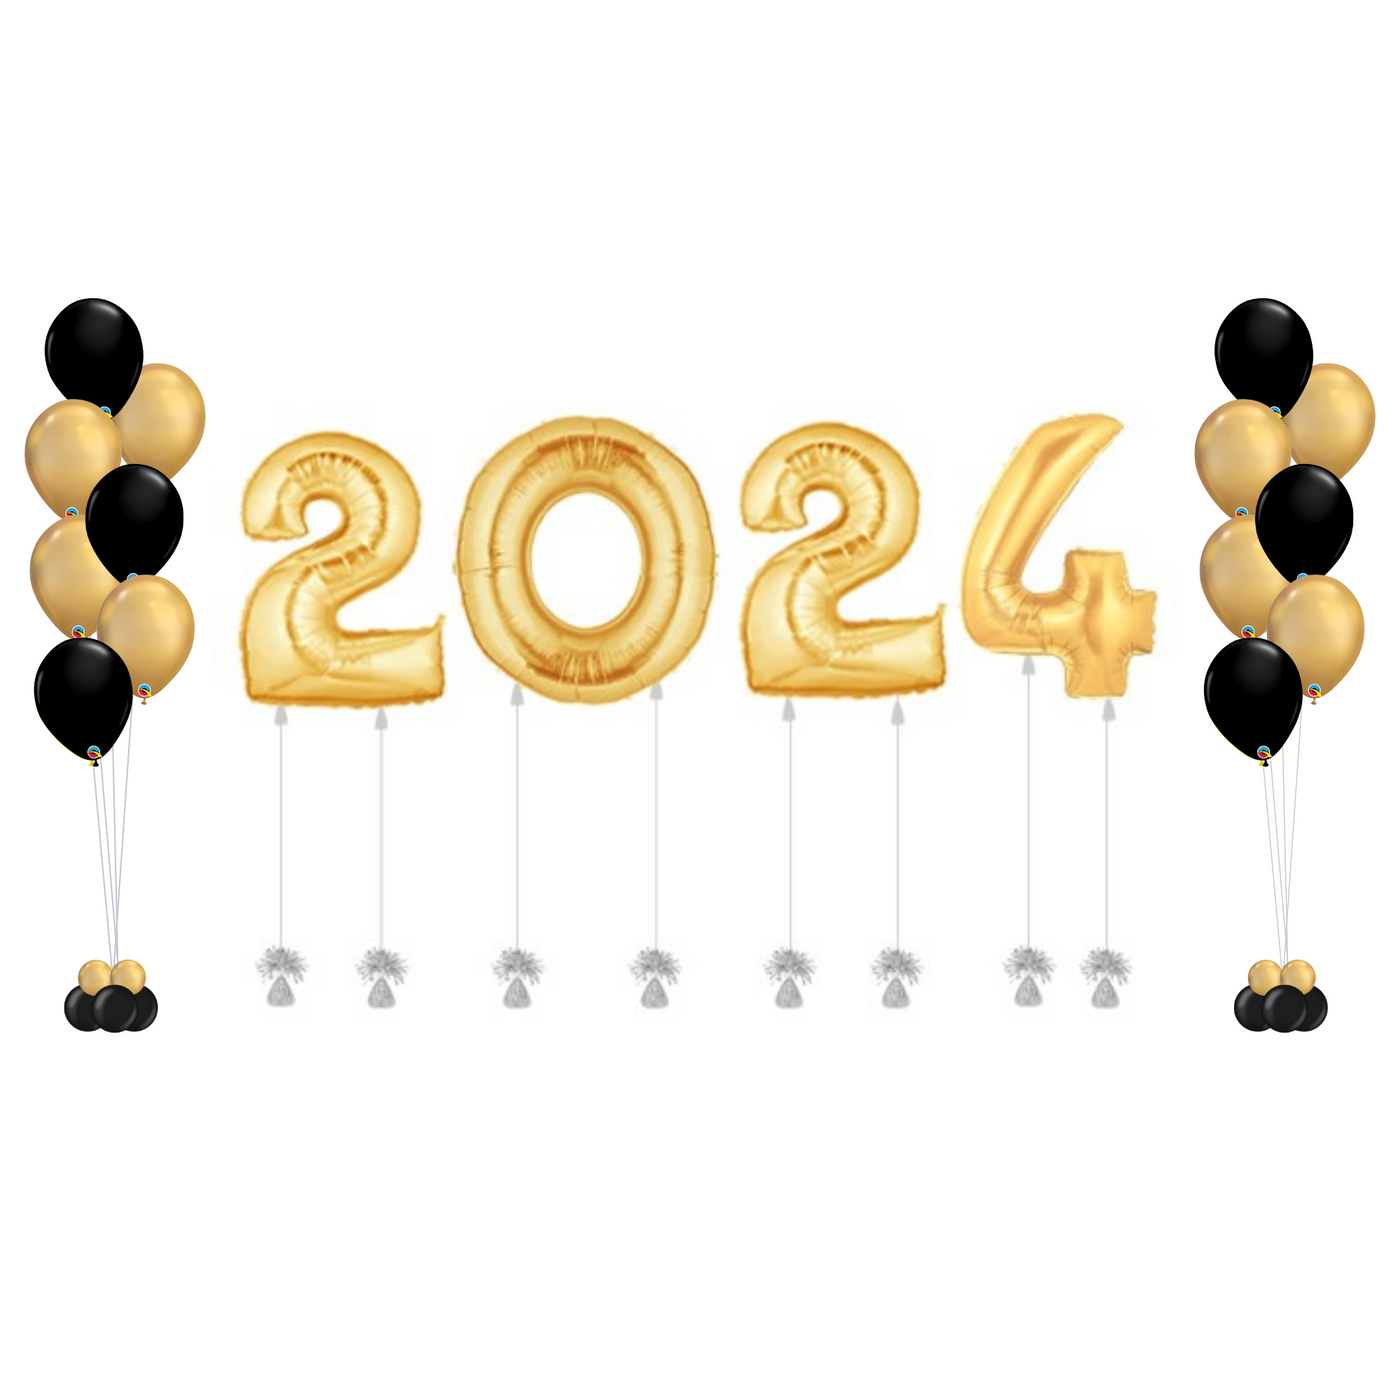 Gold "2024" Graduation Balloons With Bouquets